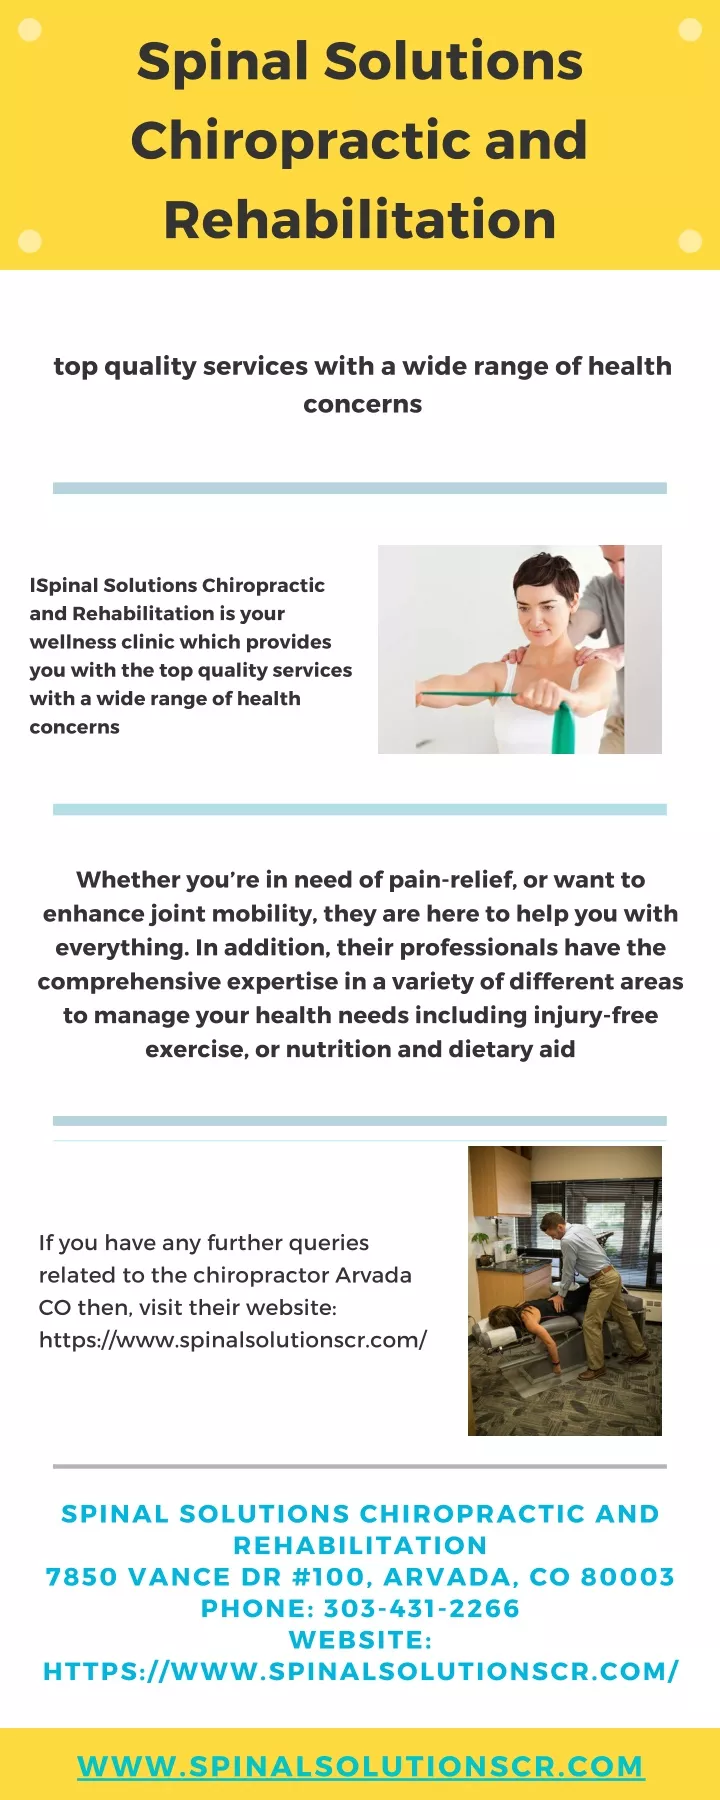 spinal solutions chiropractic and